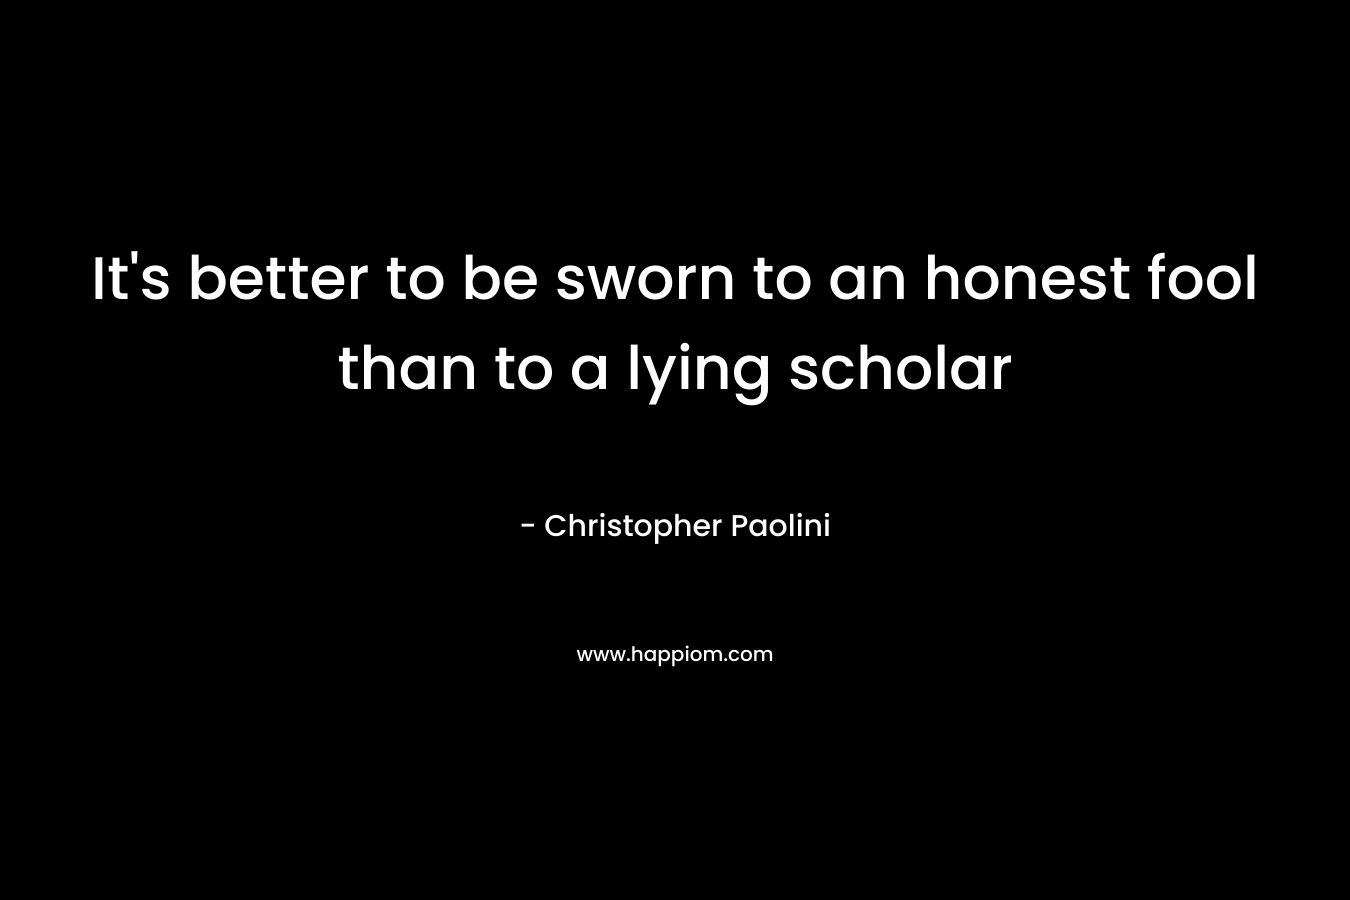 It’s better to be sworn to an honest fool than to a lying scholar – Christopher Paolini